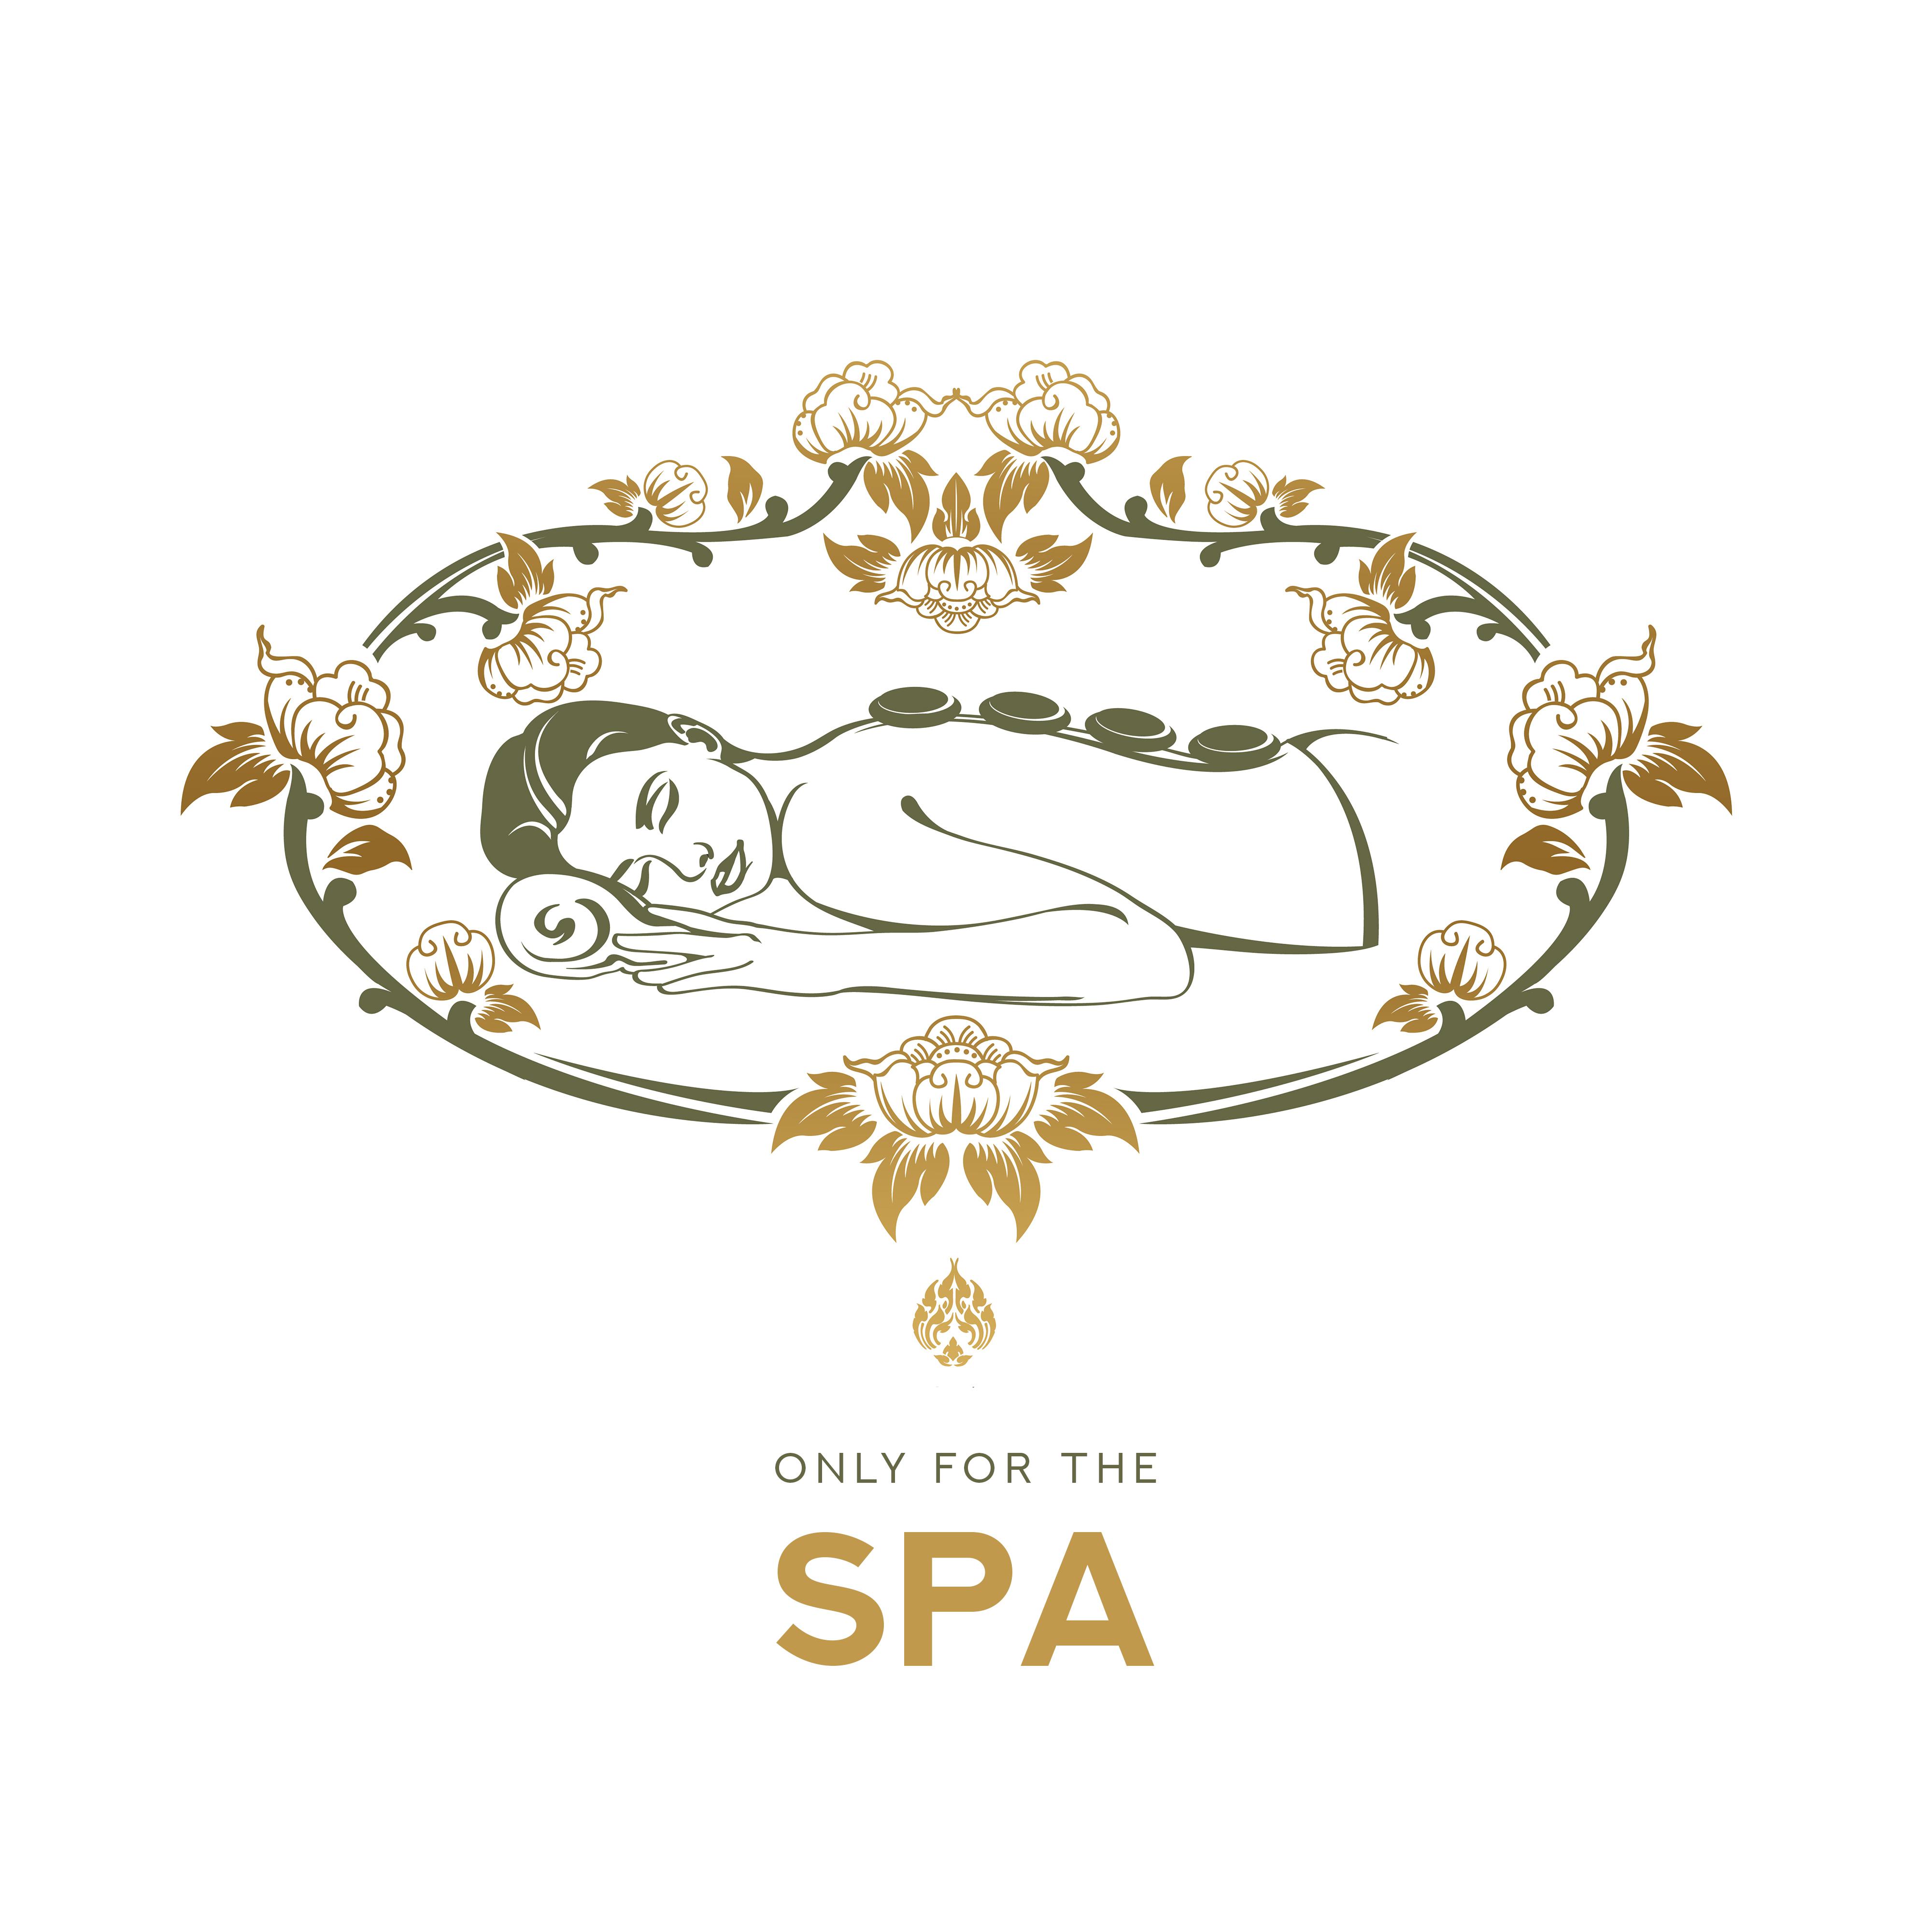 Only for the SPA - 15 Relaxing Songs for Beautifying and Rejuvenating Treatments, Massage, Wellness, Sauna, Bathing and Relaxation